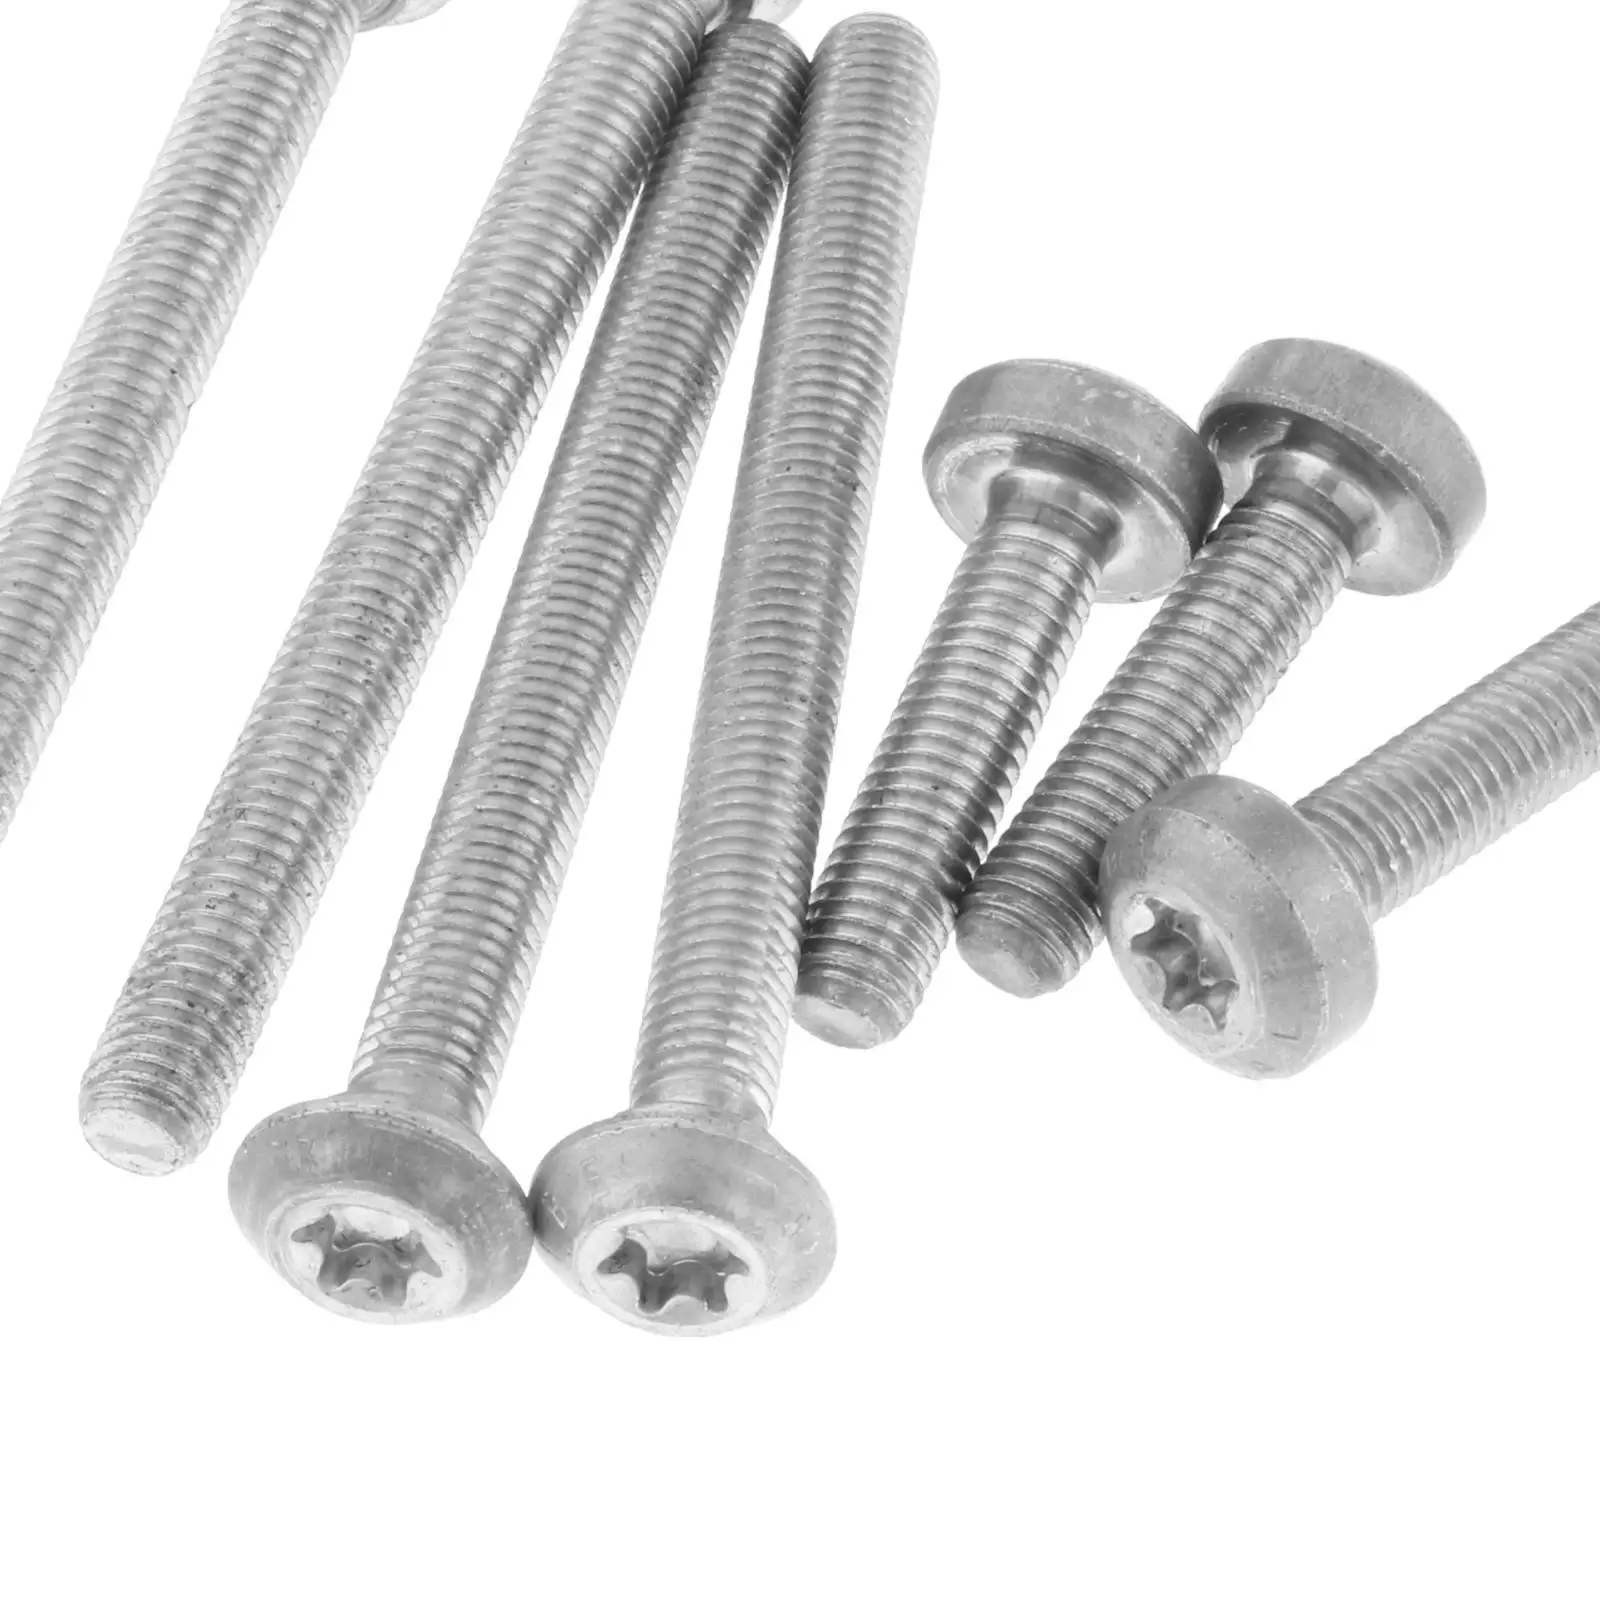 7 Pieces Dq200 Valve Body Screws 4 Long 3 Short for VW Sagitar Accessories Replacement